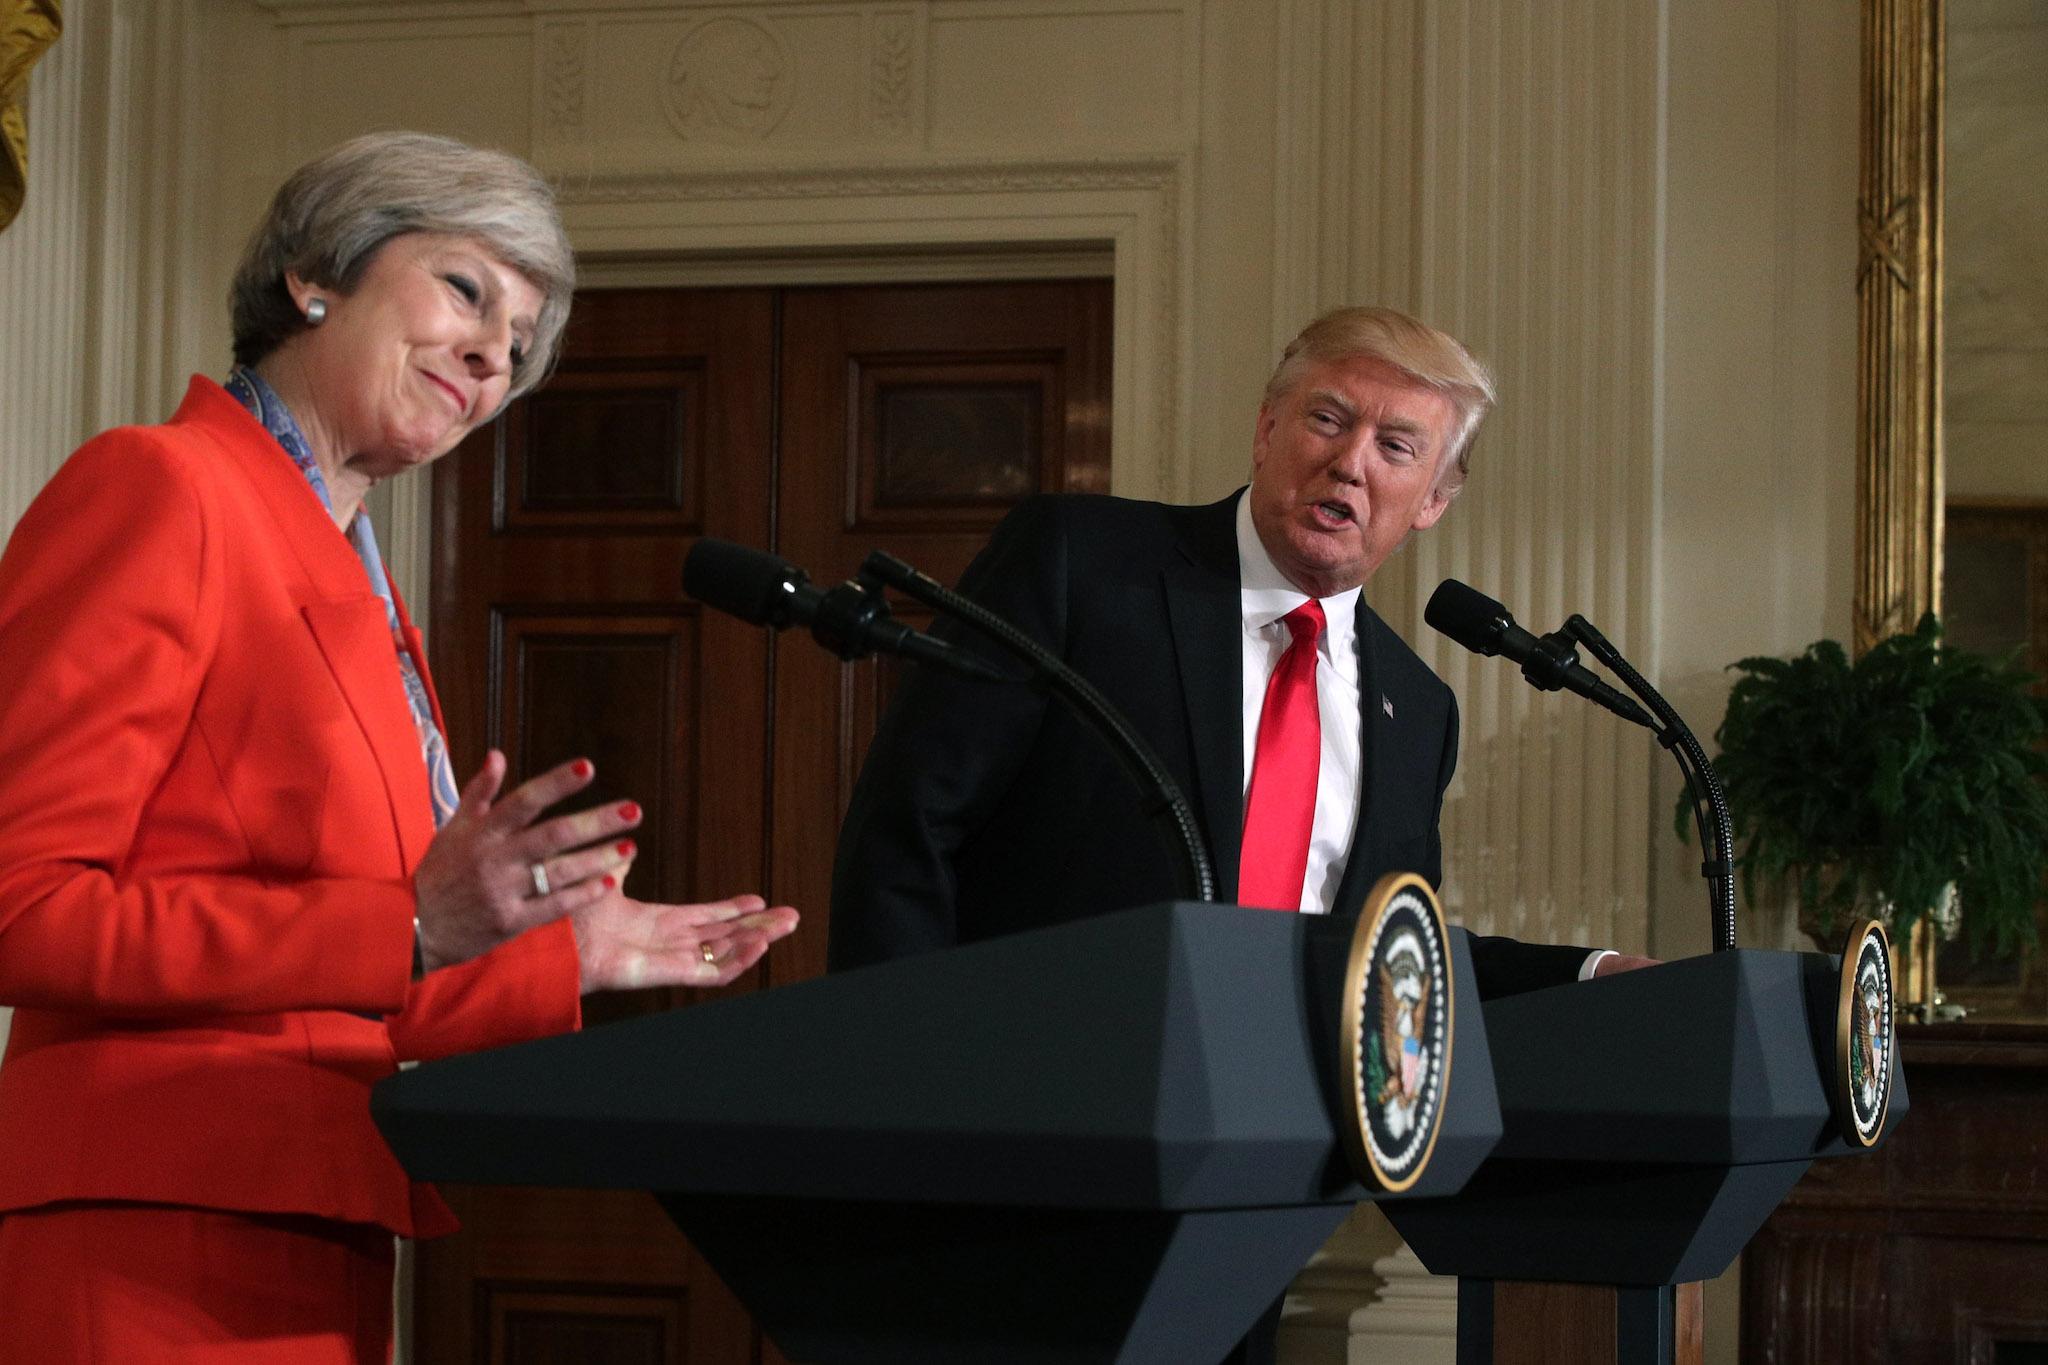 Donald Trump and Theresa May participate in a joint press conference during the prime minister's visit to Washington in January